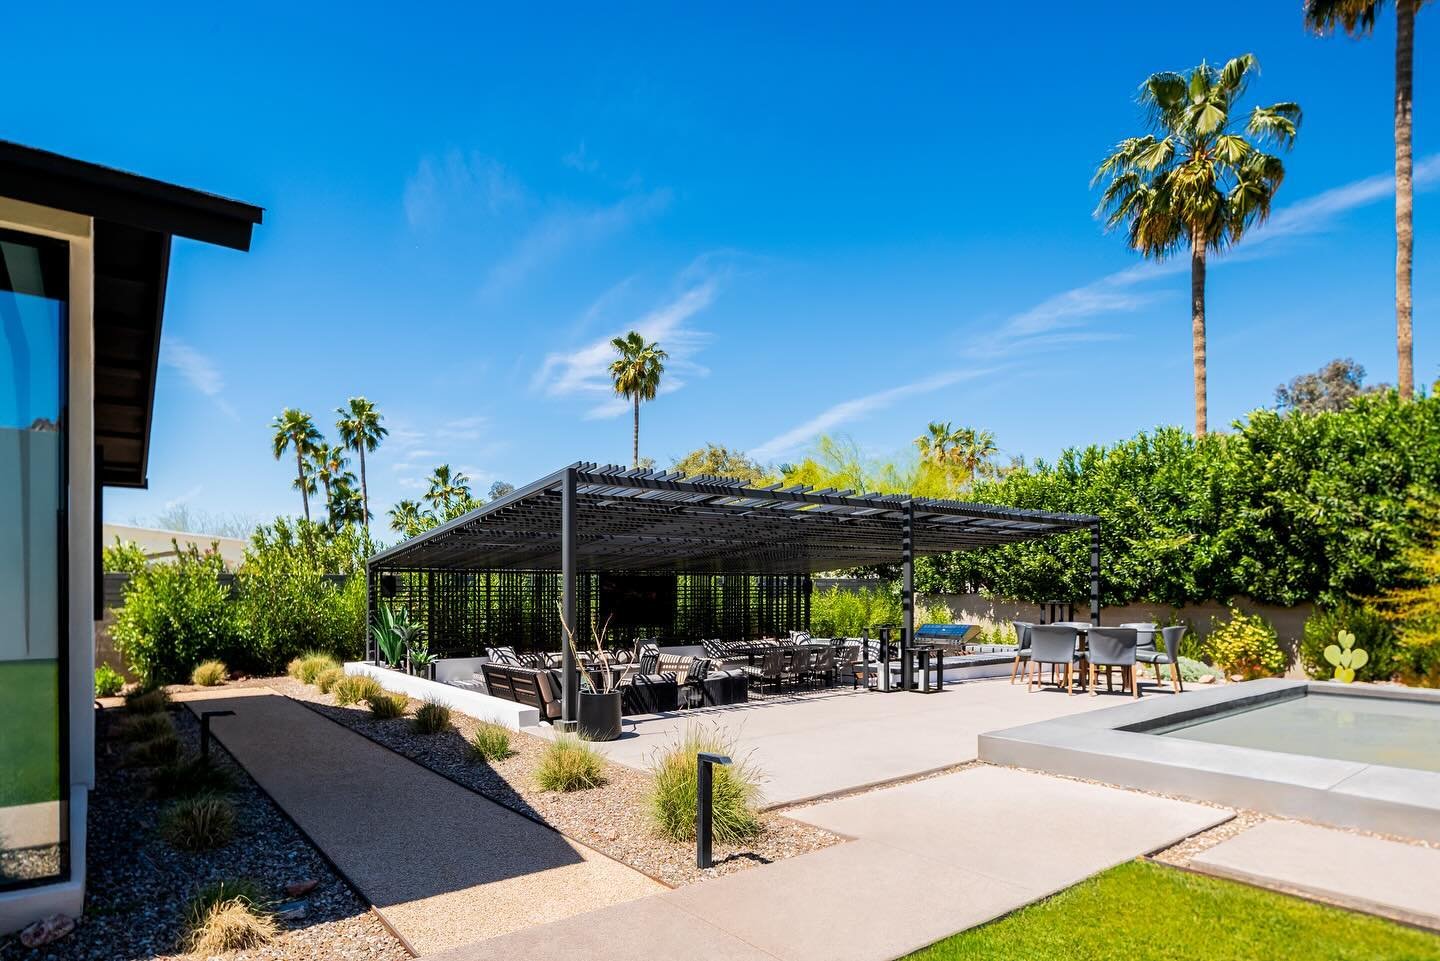 We are excited to share with you our recently completed patio trellis shade structure for a residence in Phoenix, AZ! The design explores layering slats in opposing directions to create a lattice-like canopy to shelter the outdoor living area below. 